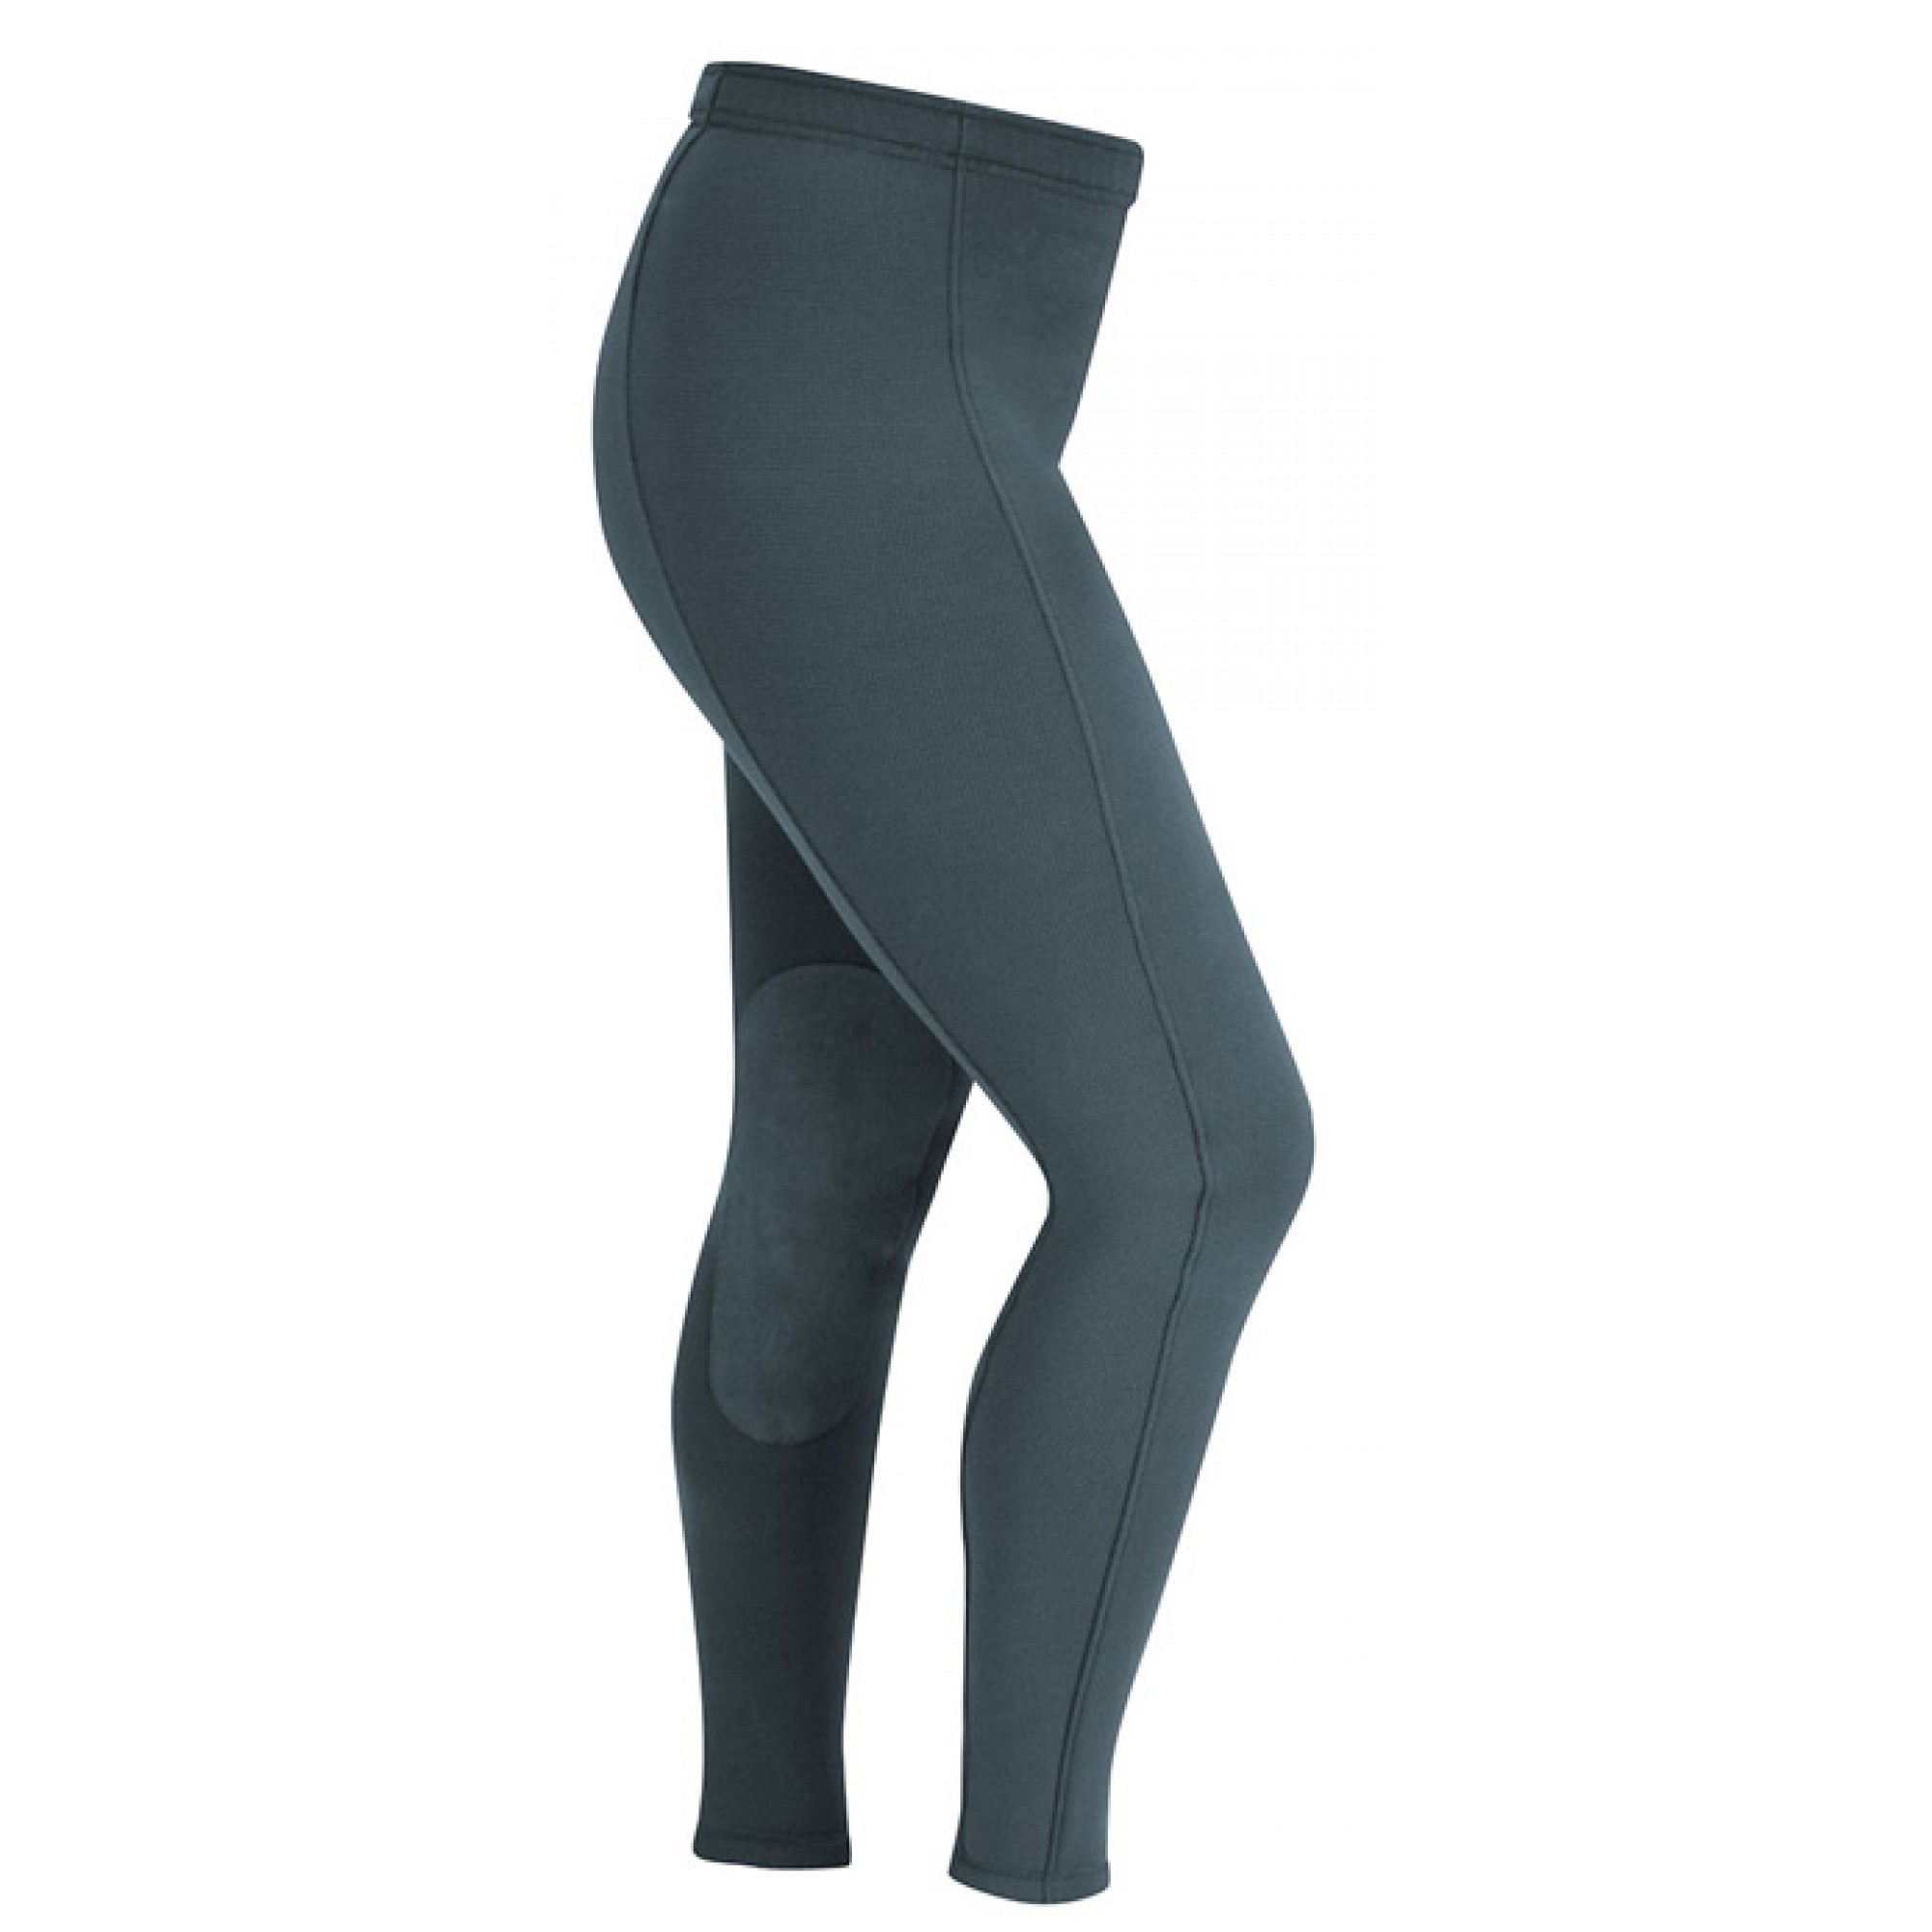 Riding breeches Wind Pro® Softshell knee patches long sizes